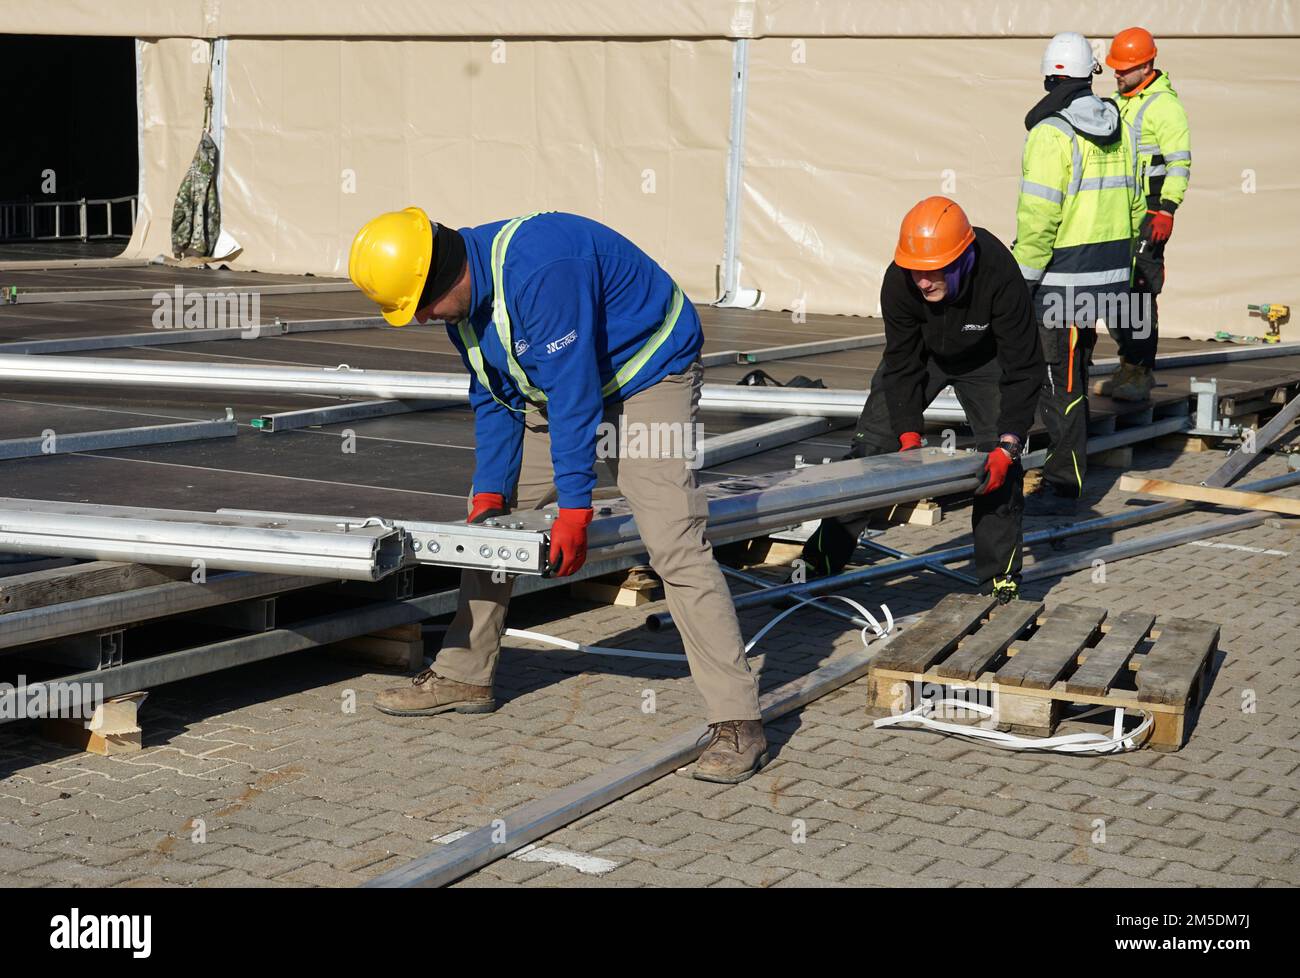 Kellogg, Brown and Root (KBR) contractors assemble a frame for an expeditionary dining facility on Barton Barracks, Ansbach, Germany, March 4, 2022, in preparation to receive forces. The deployment of U.S. forces here is a prudent measure that underpins NATO’s collective war-prevention aims, defensive orientation and commitment to protect all Allies. Stock Photo